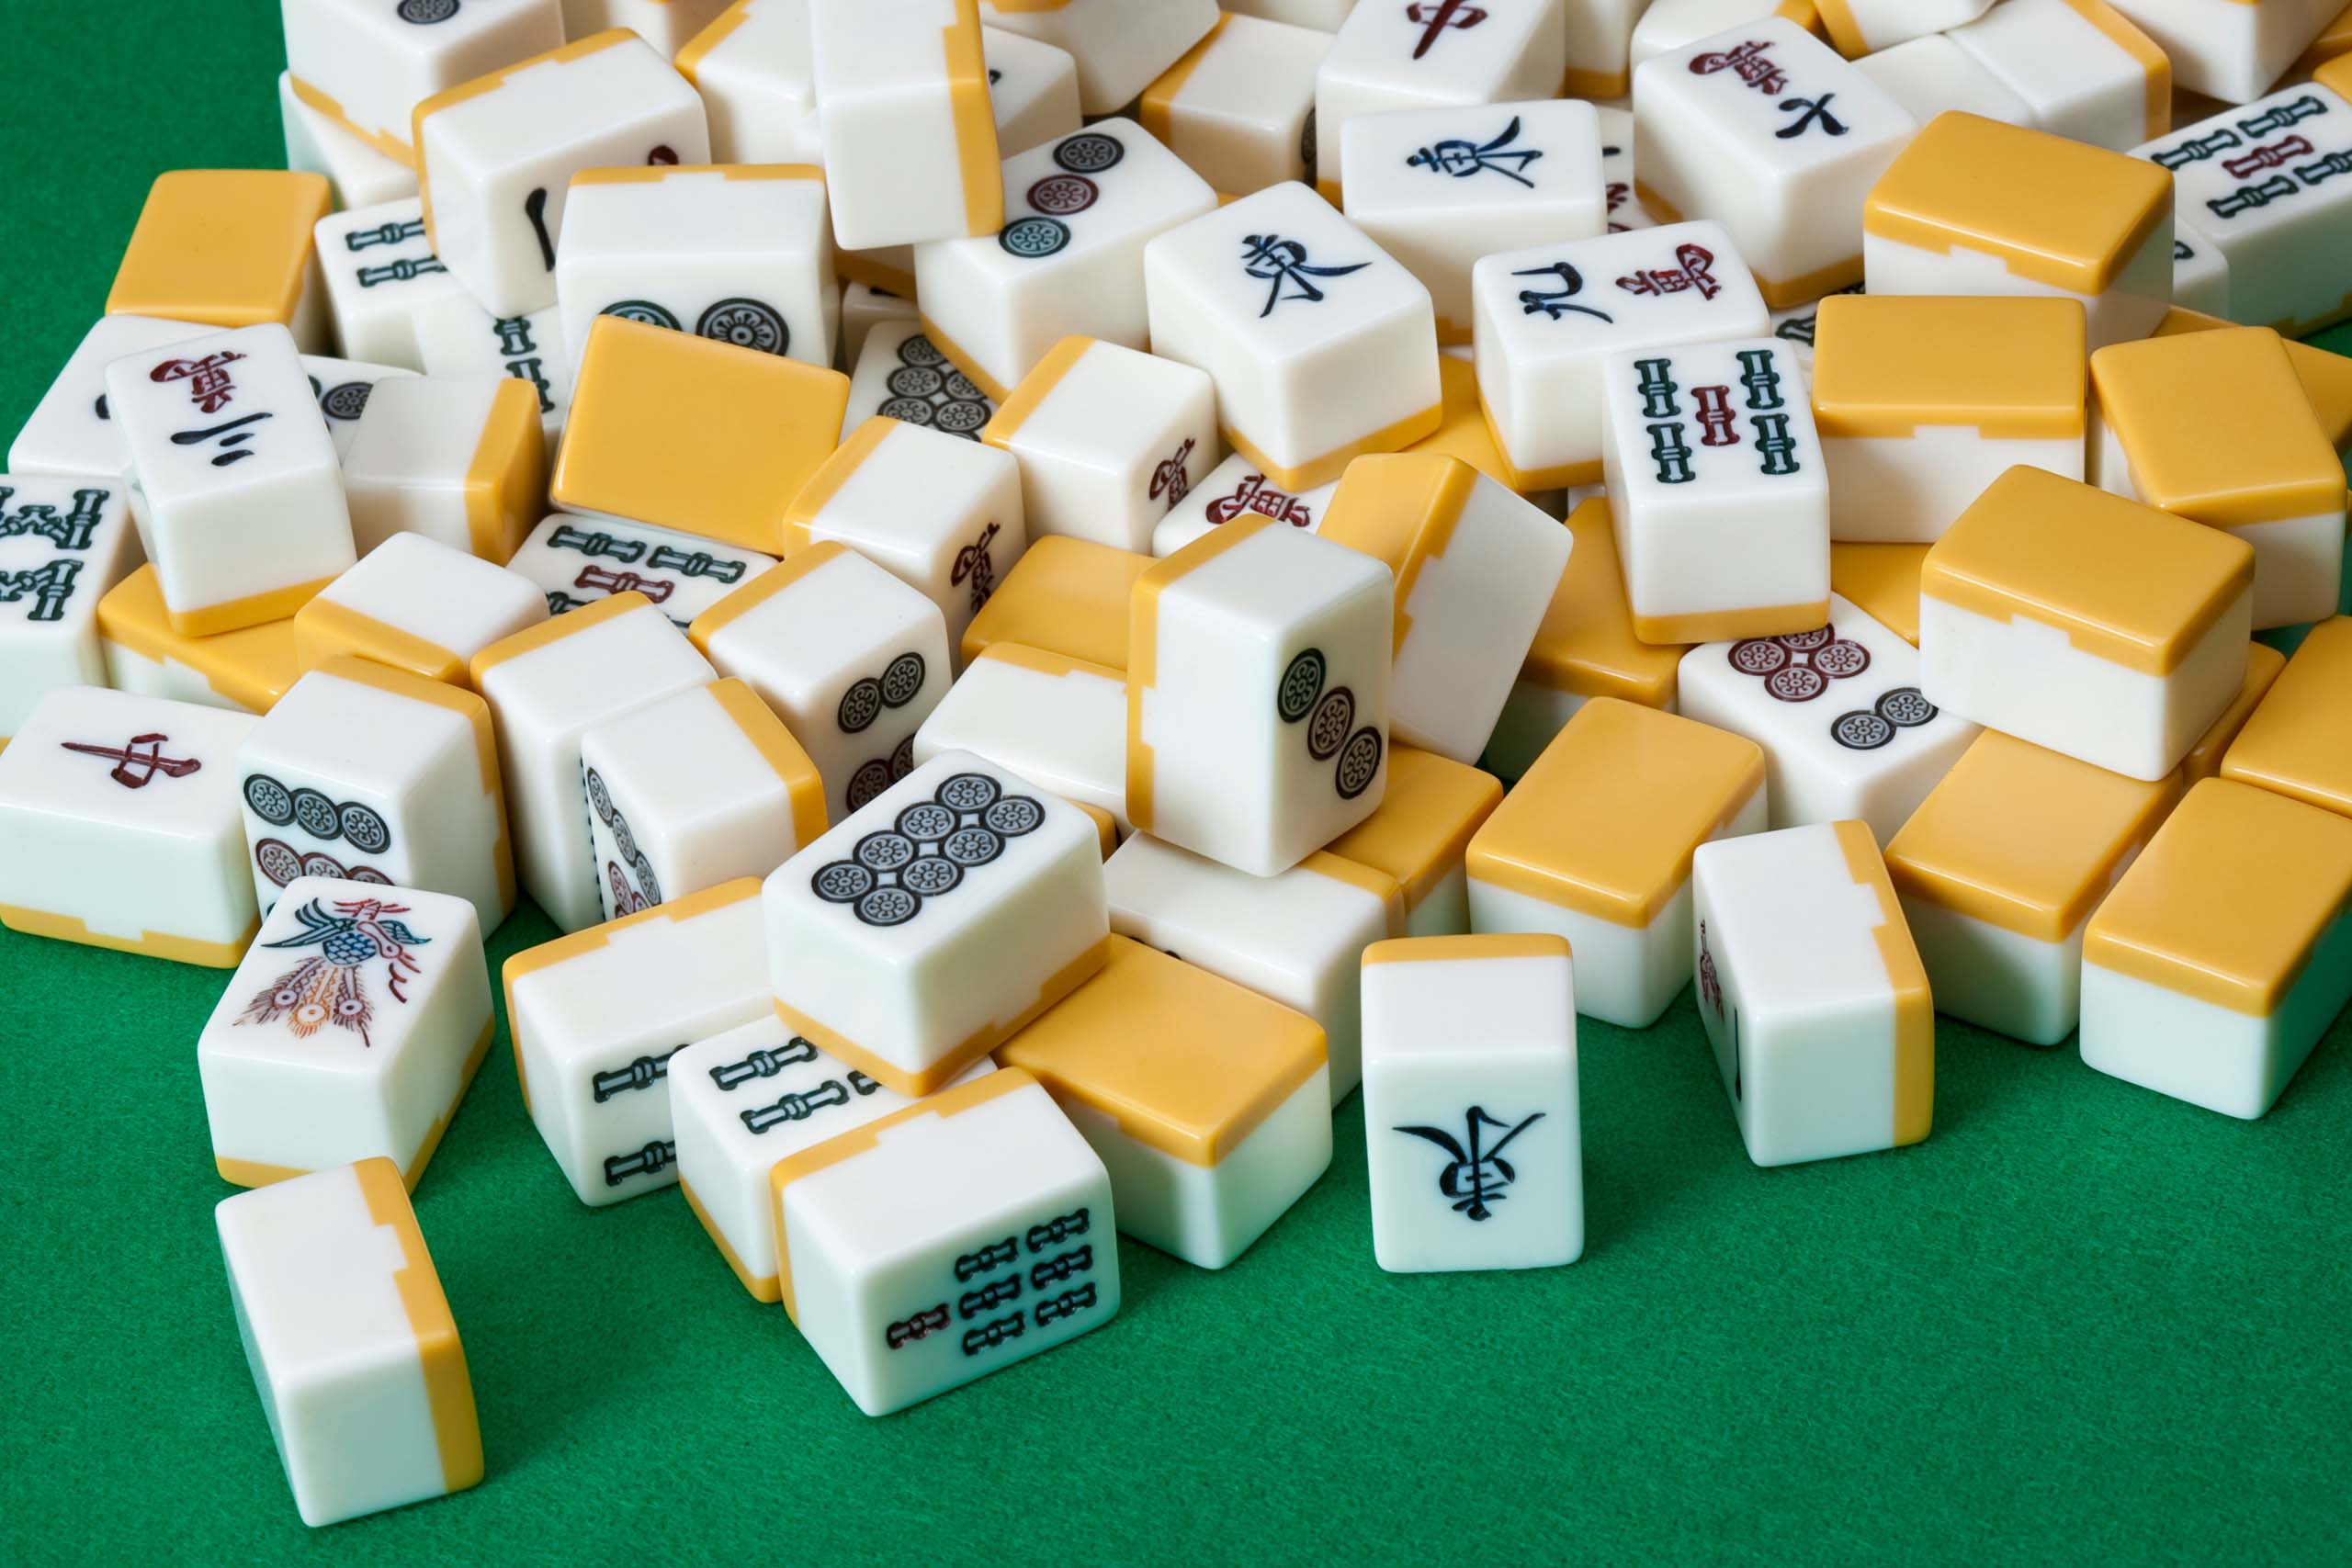 Join the Mahjong Group at Menai Library each Tuesday to play this fascinating and elaborate game requiring skill, luck and concentration.